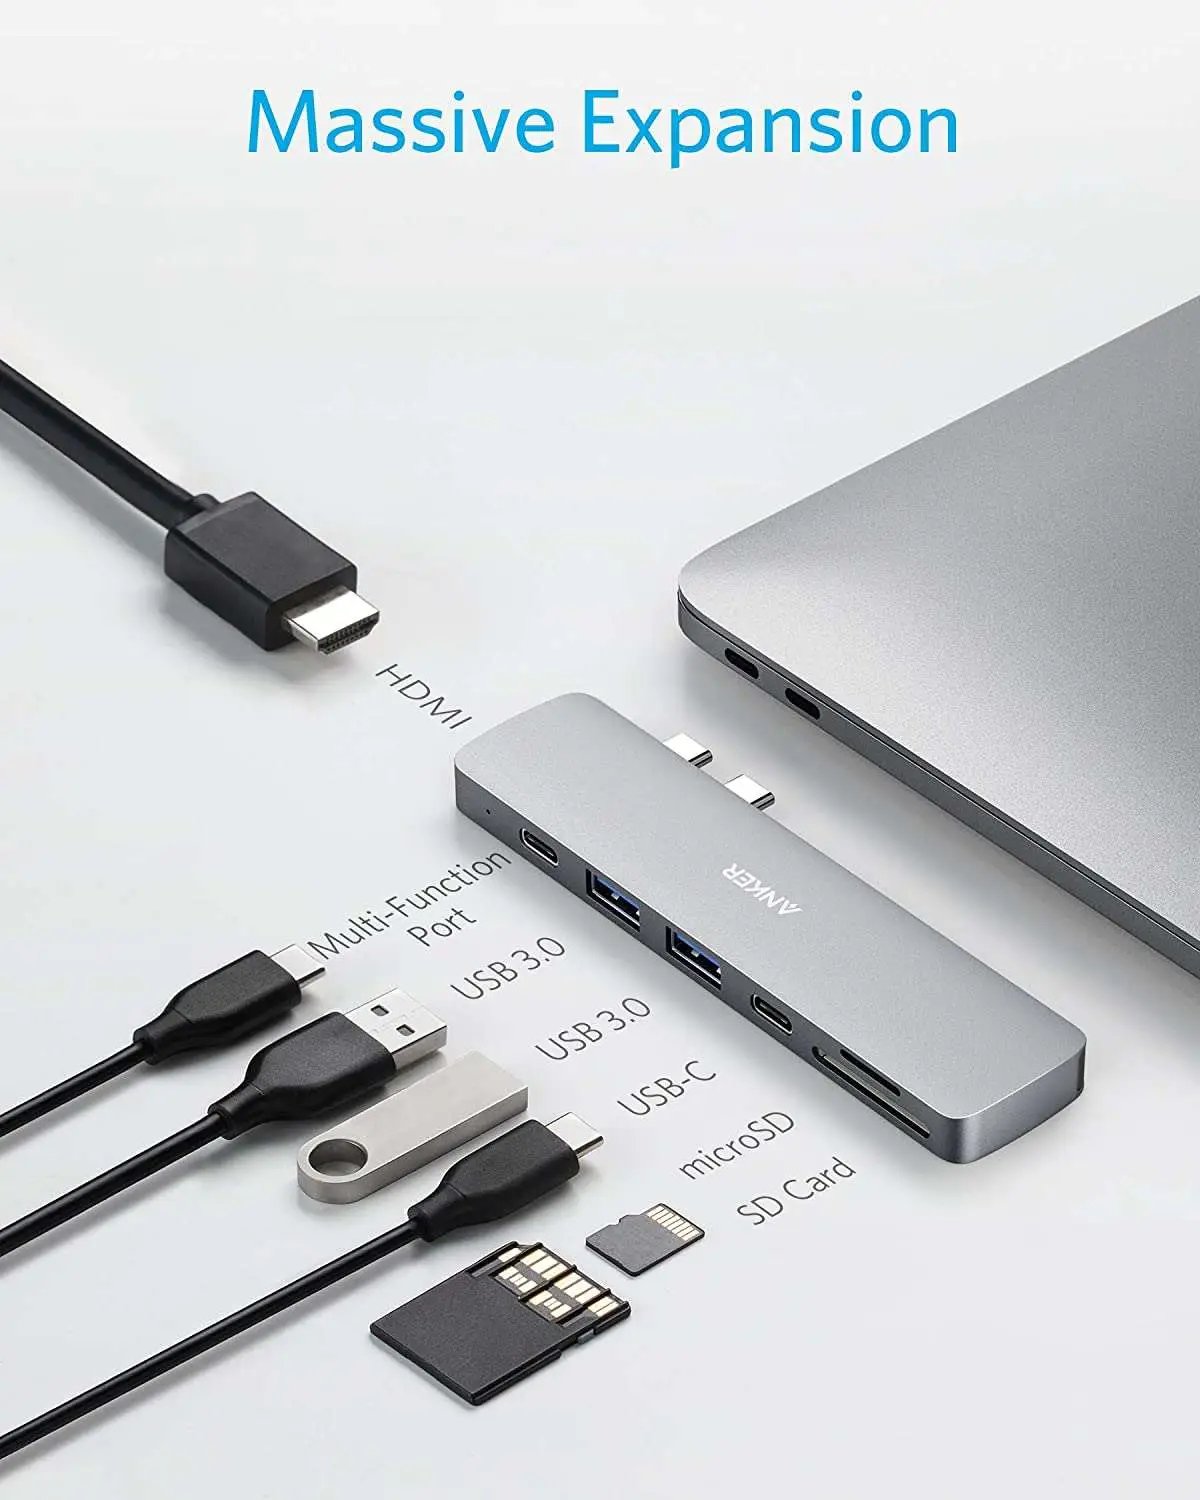 Anker USB C Hub, 341 USB-C Hub (7-in-1) with 4K HDMI, 100W Power Delivery,  USB-C and 2 USB-A 5 Gbps Data Ports, microSD and SD Card Reader, for